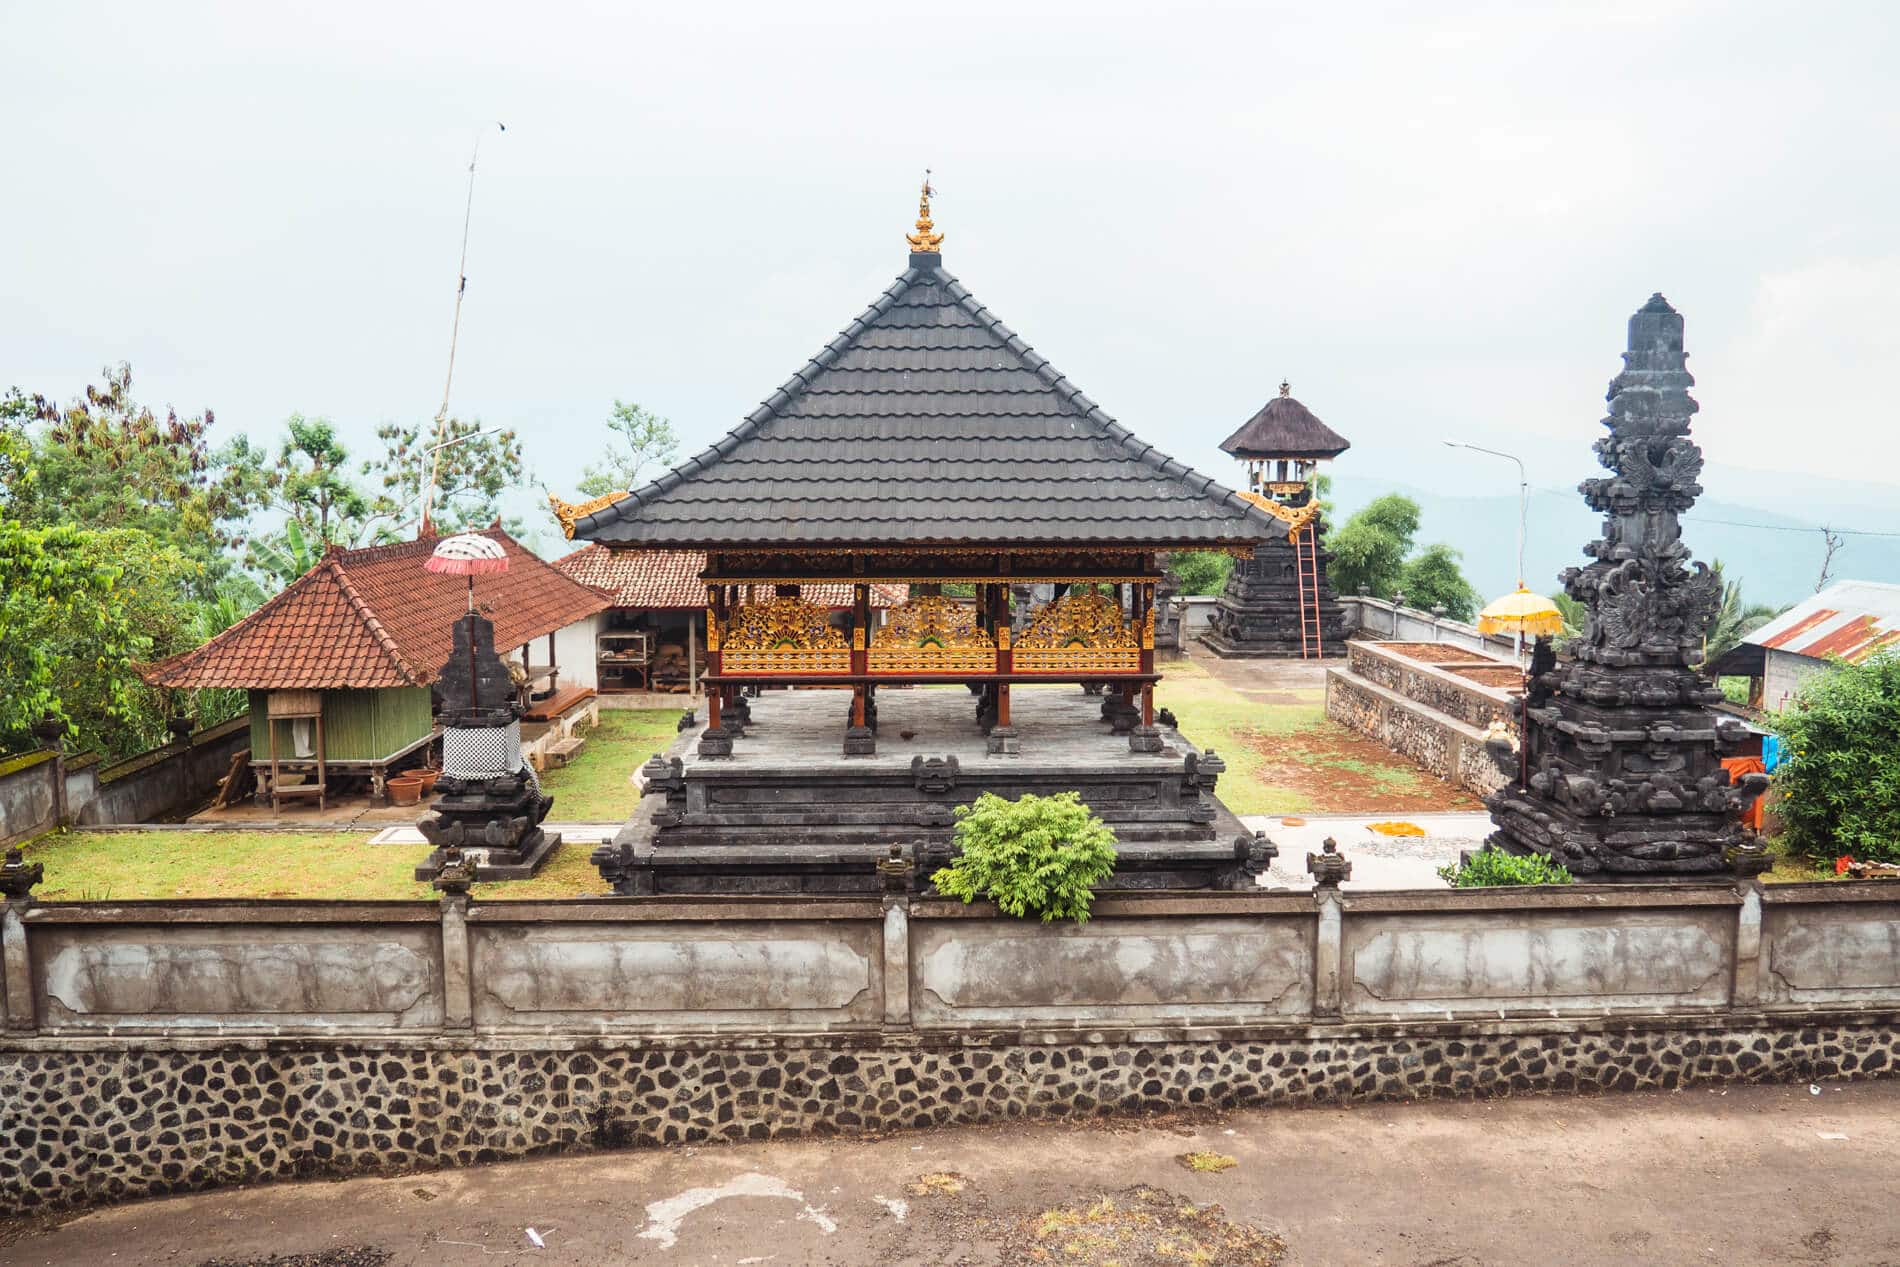 One of the smaller temples complexes at Pura Lempuyang in East Bali